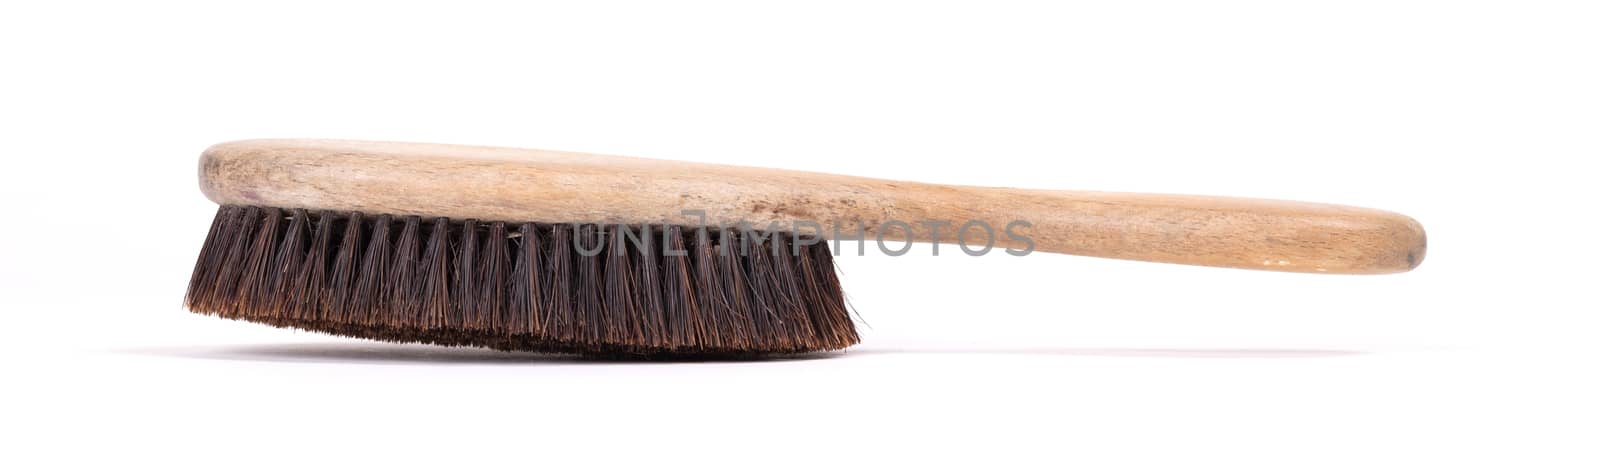 Old hair brush with some hair in it, isolated on white